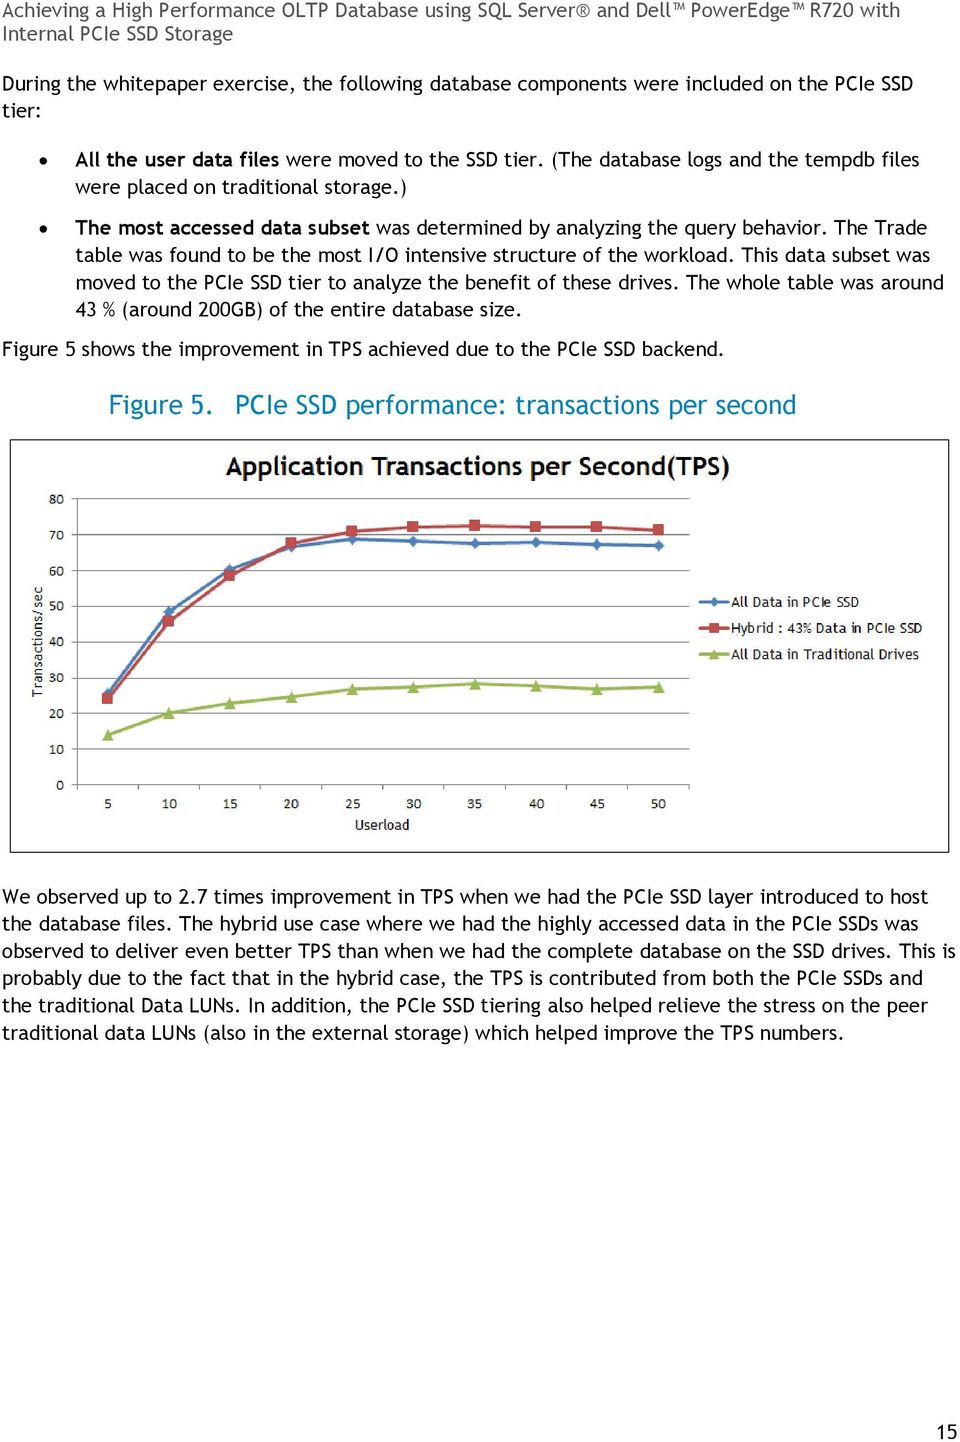 The Trade table was found to be the most I/O intensive structure of the workload. This data subset was moved to the PCIe SSD tier to analyze the benefit of these drives.